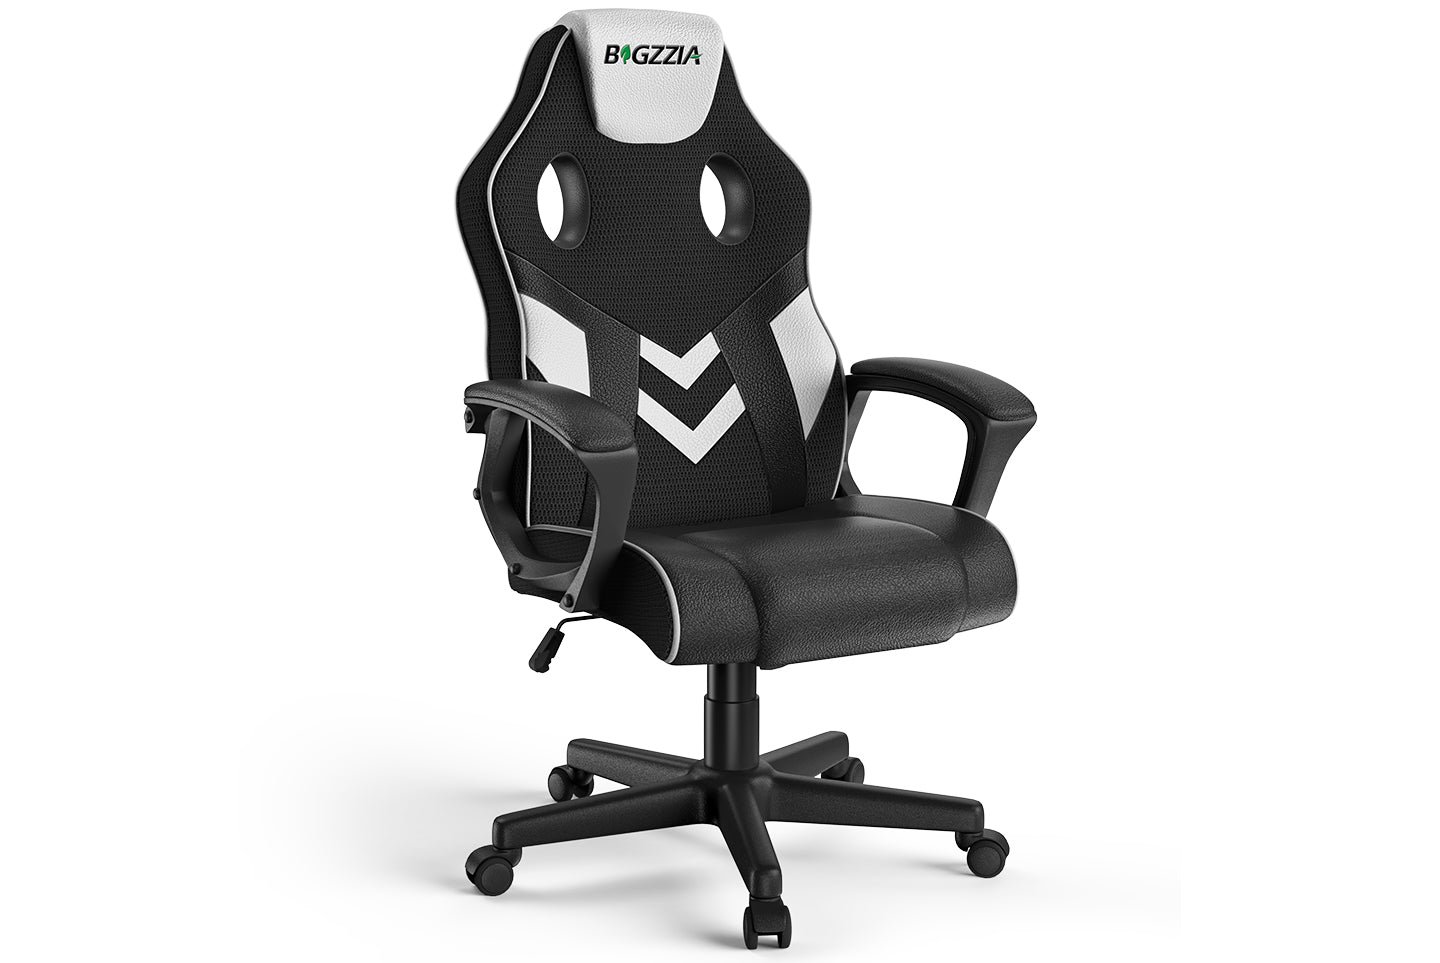 PU Leather Gaming Chair Ergonomic Office Computer Chair with Headrest, Adjustable Height